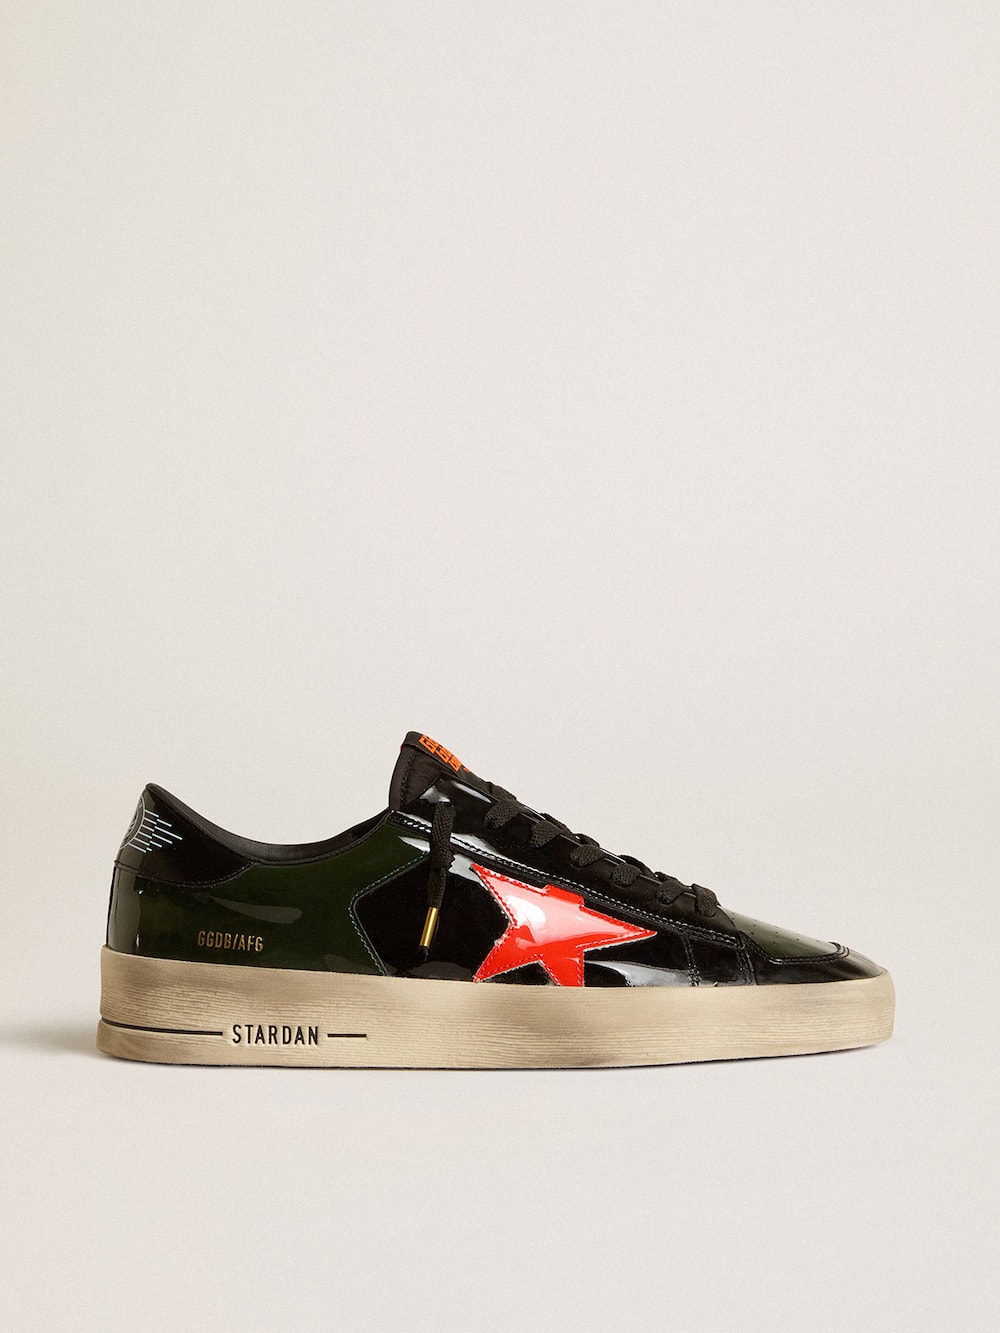 Golden Goose - Men's Stardan LAB in black and green patent leather with orange star in 